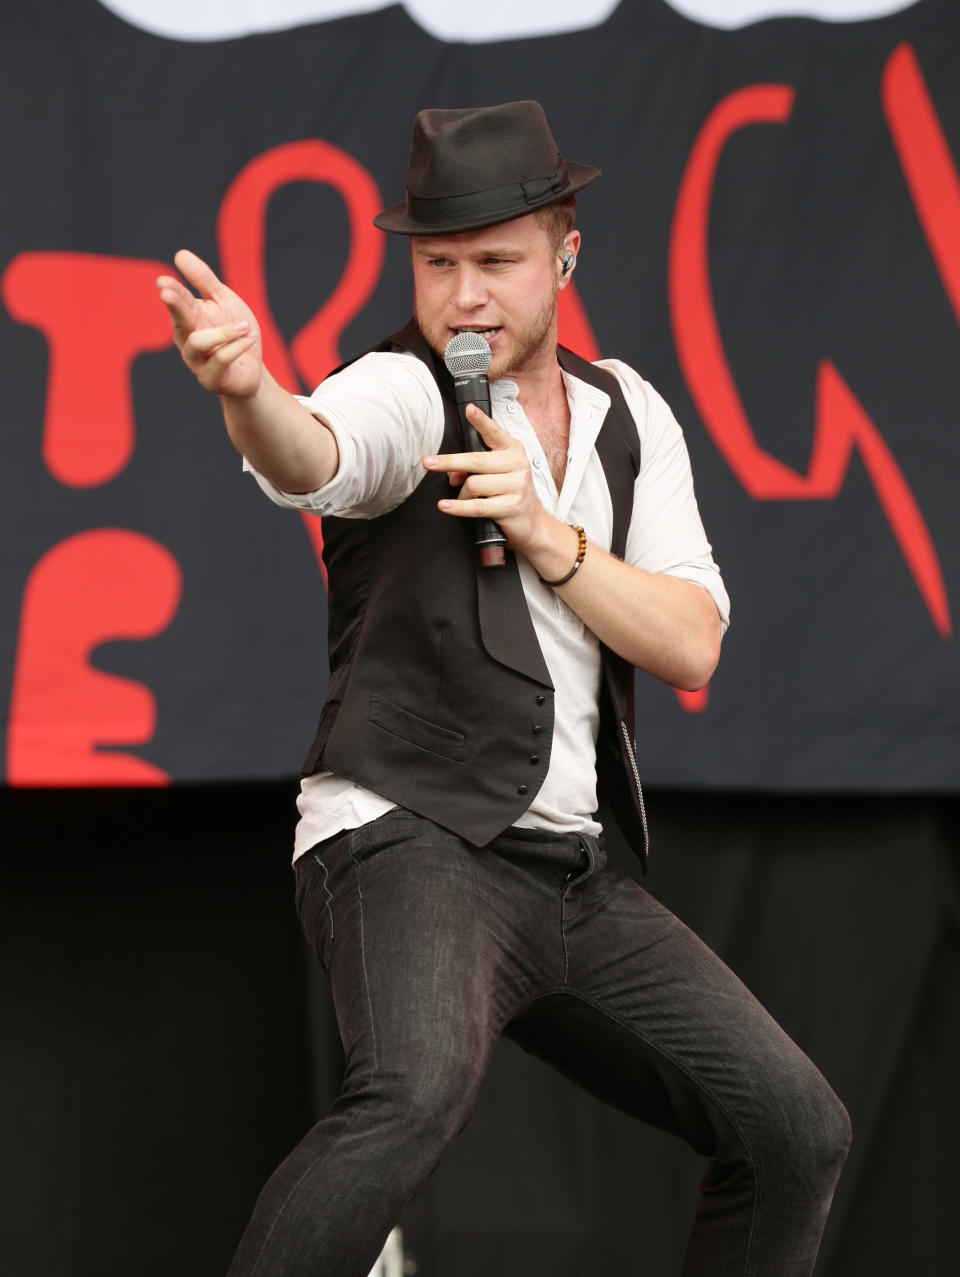 Olly Murs performing on the Virgin Media Stage during day two of the V Festival at Hylands Park in Chelmsford.